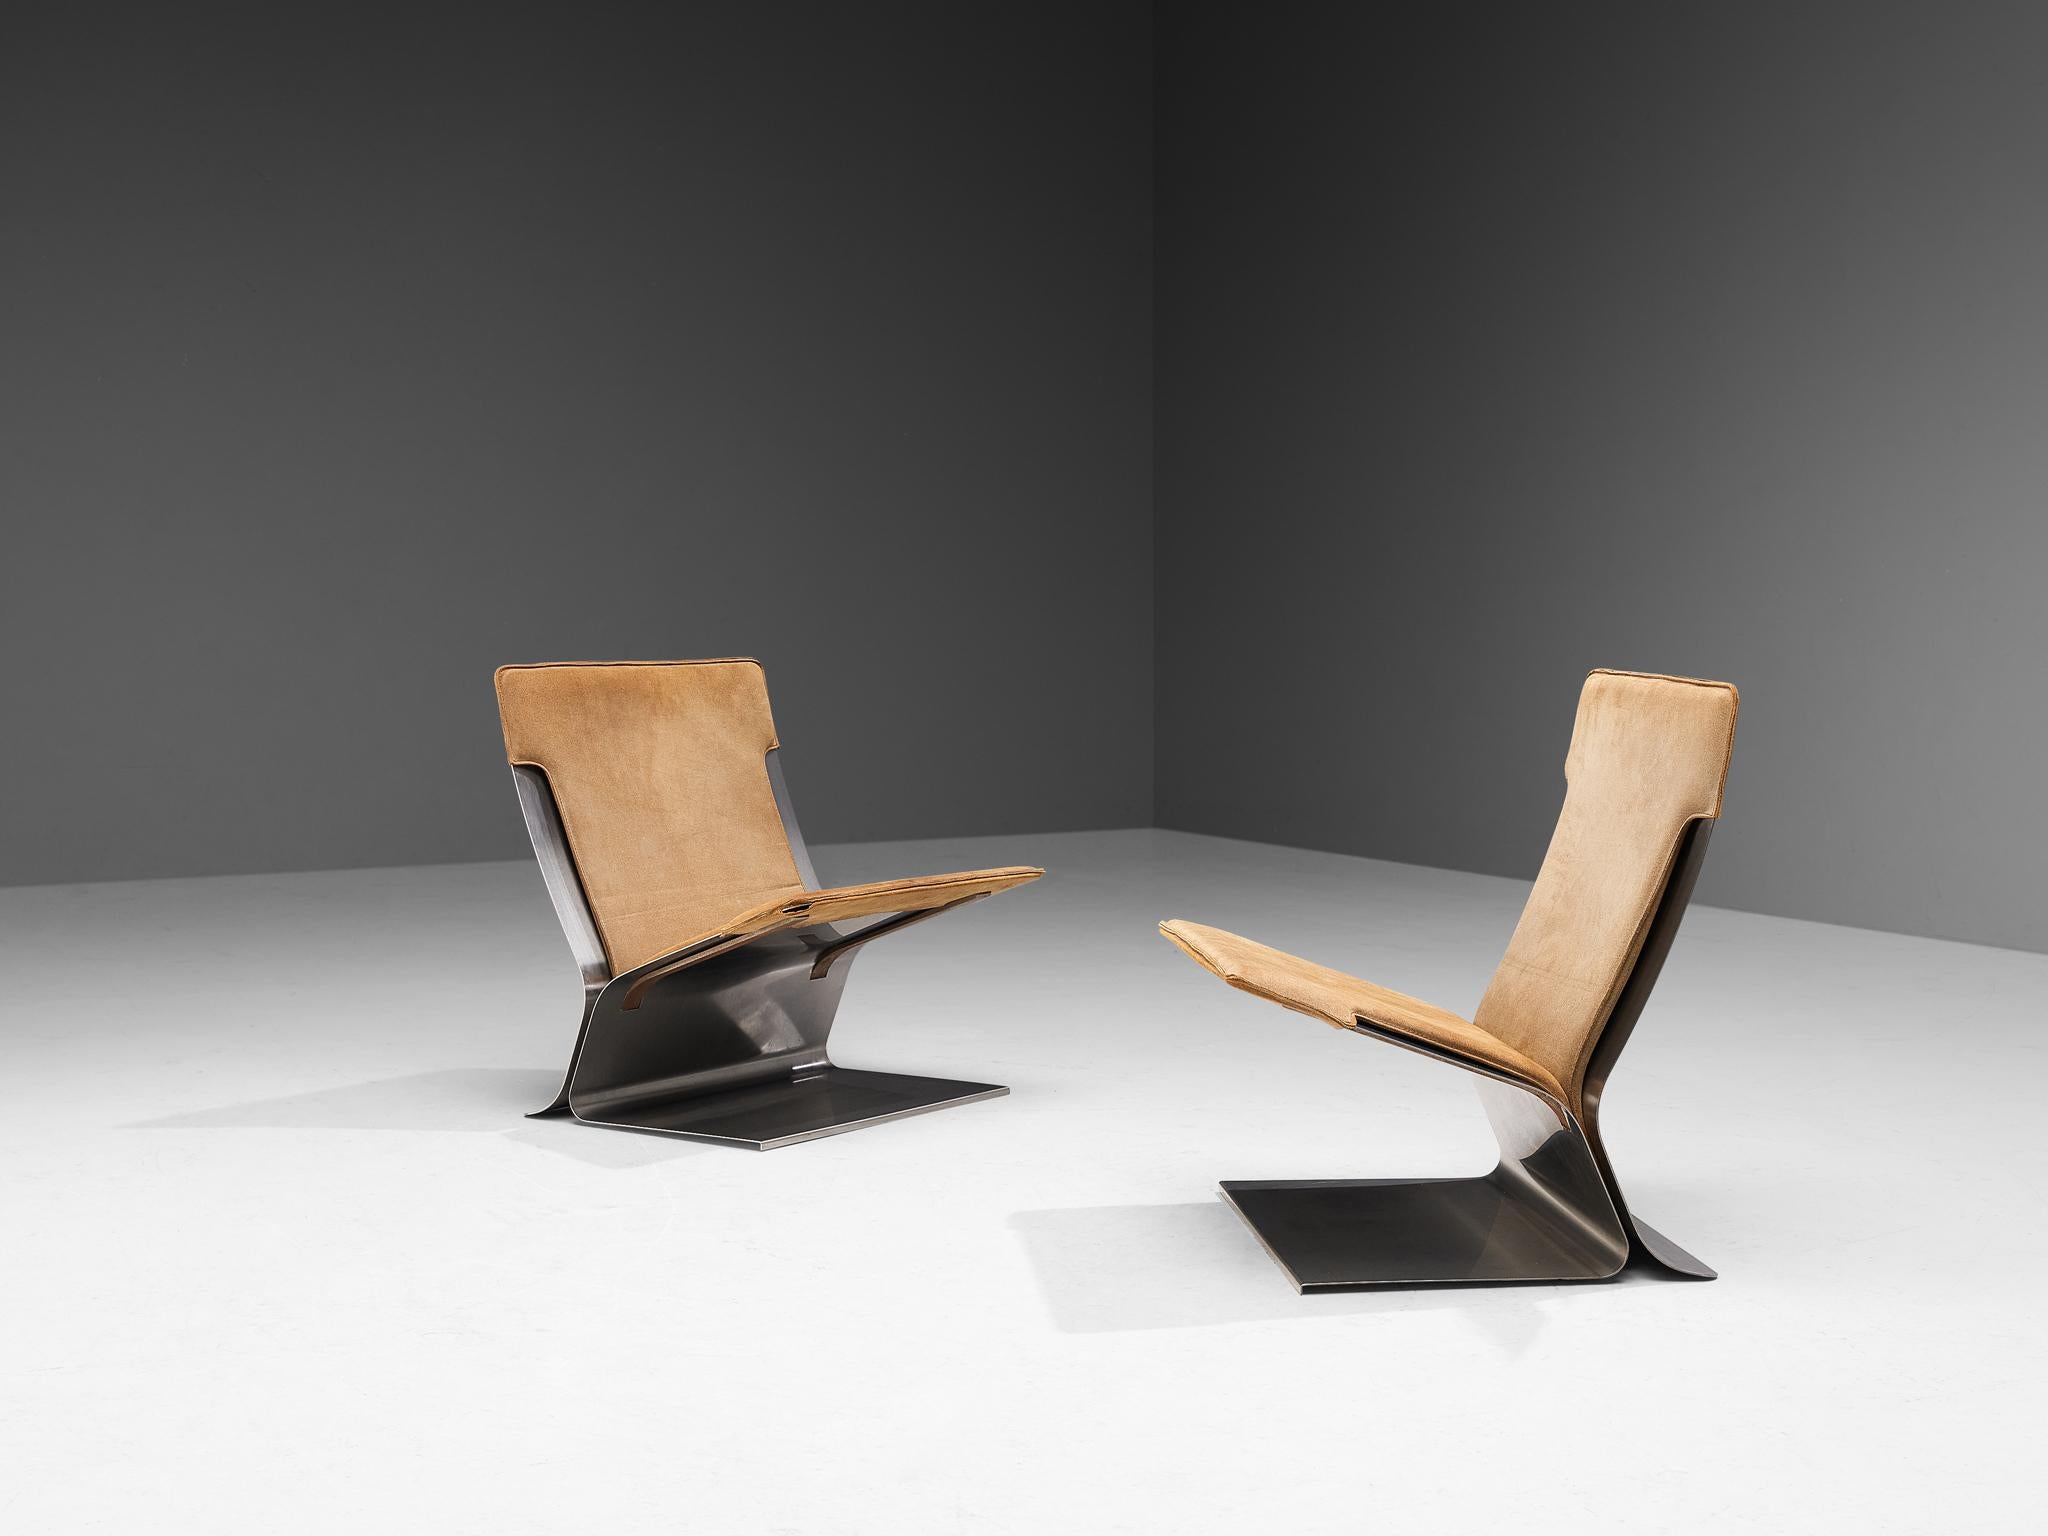 Pierre Folie for Jacques Charpentier 'Chauffeuse' Pair of Lounge Chairs  1